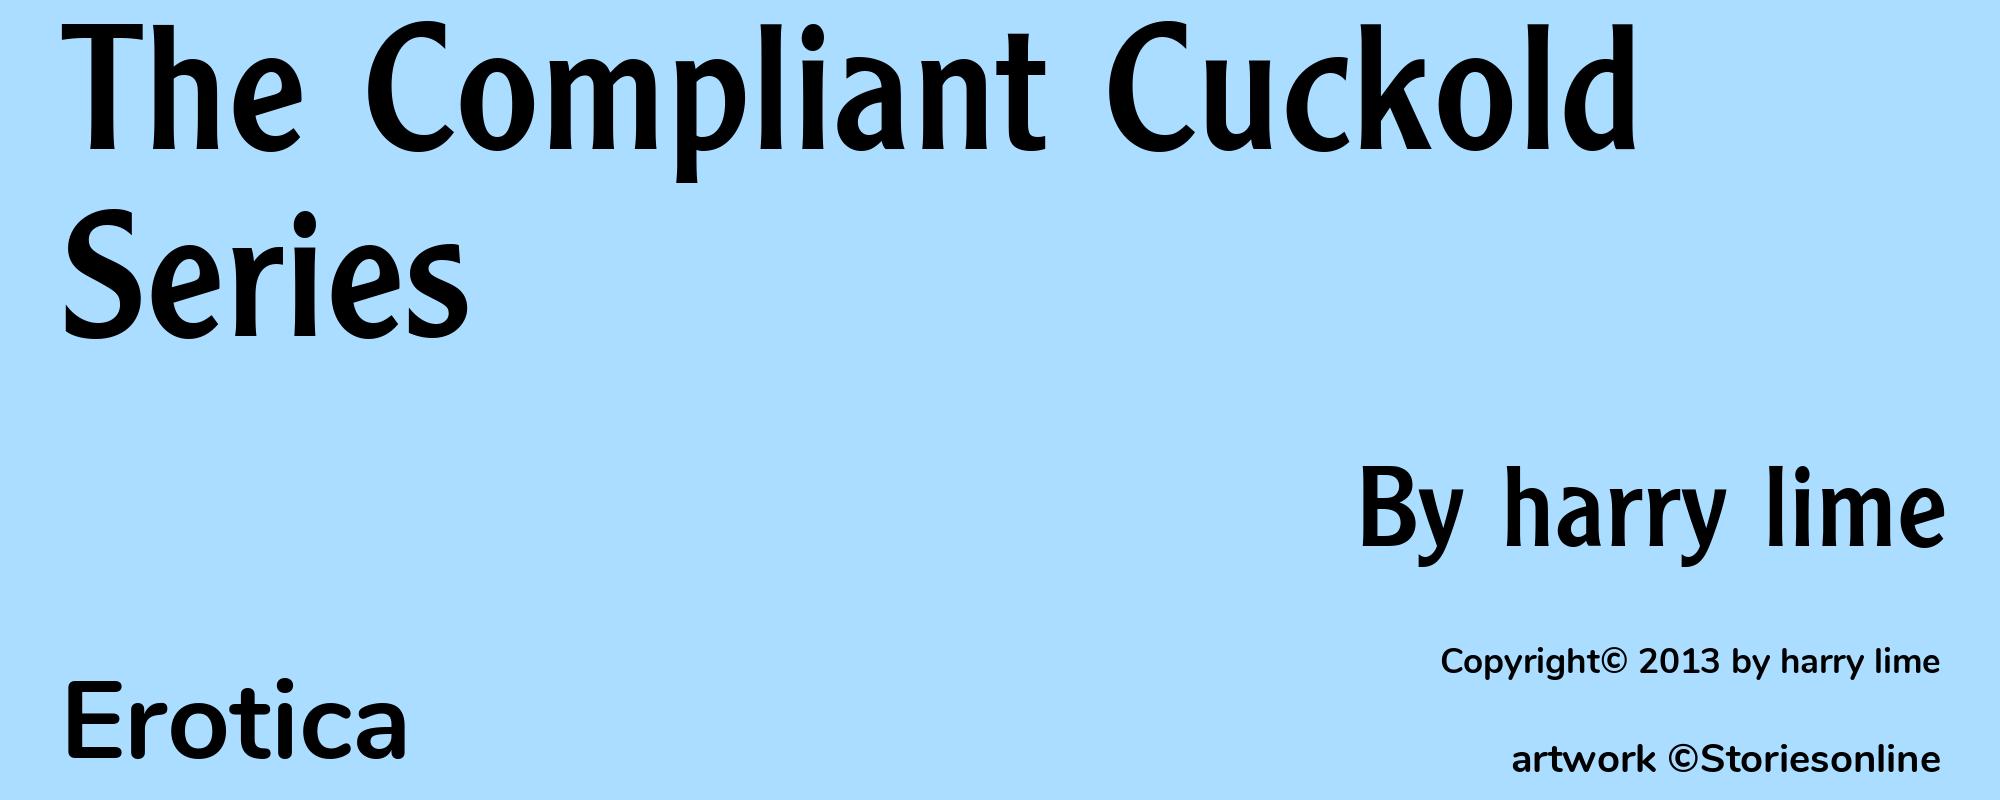 The Compliant Cuckold Series - Cover